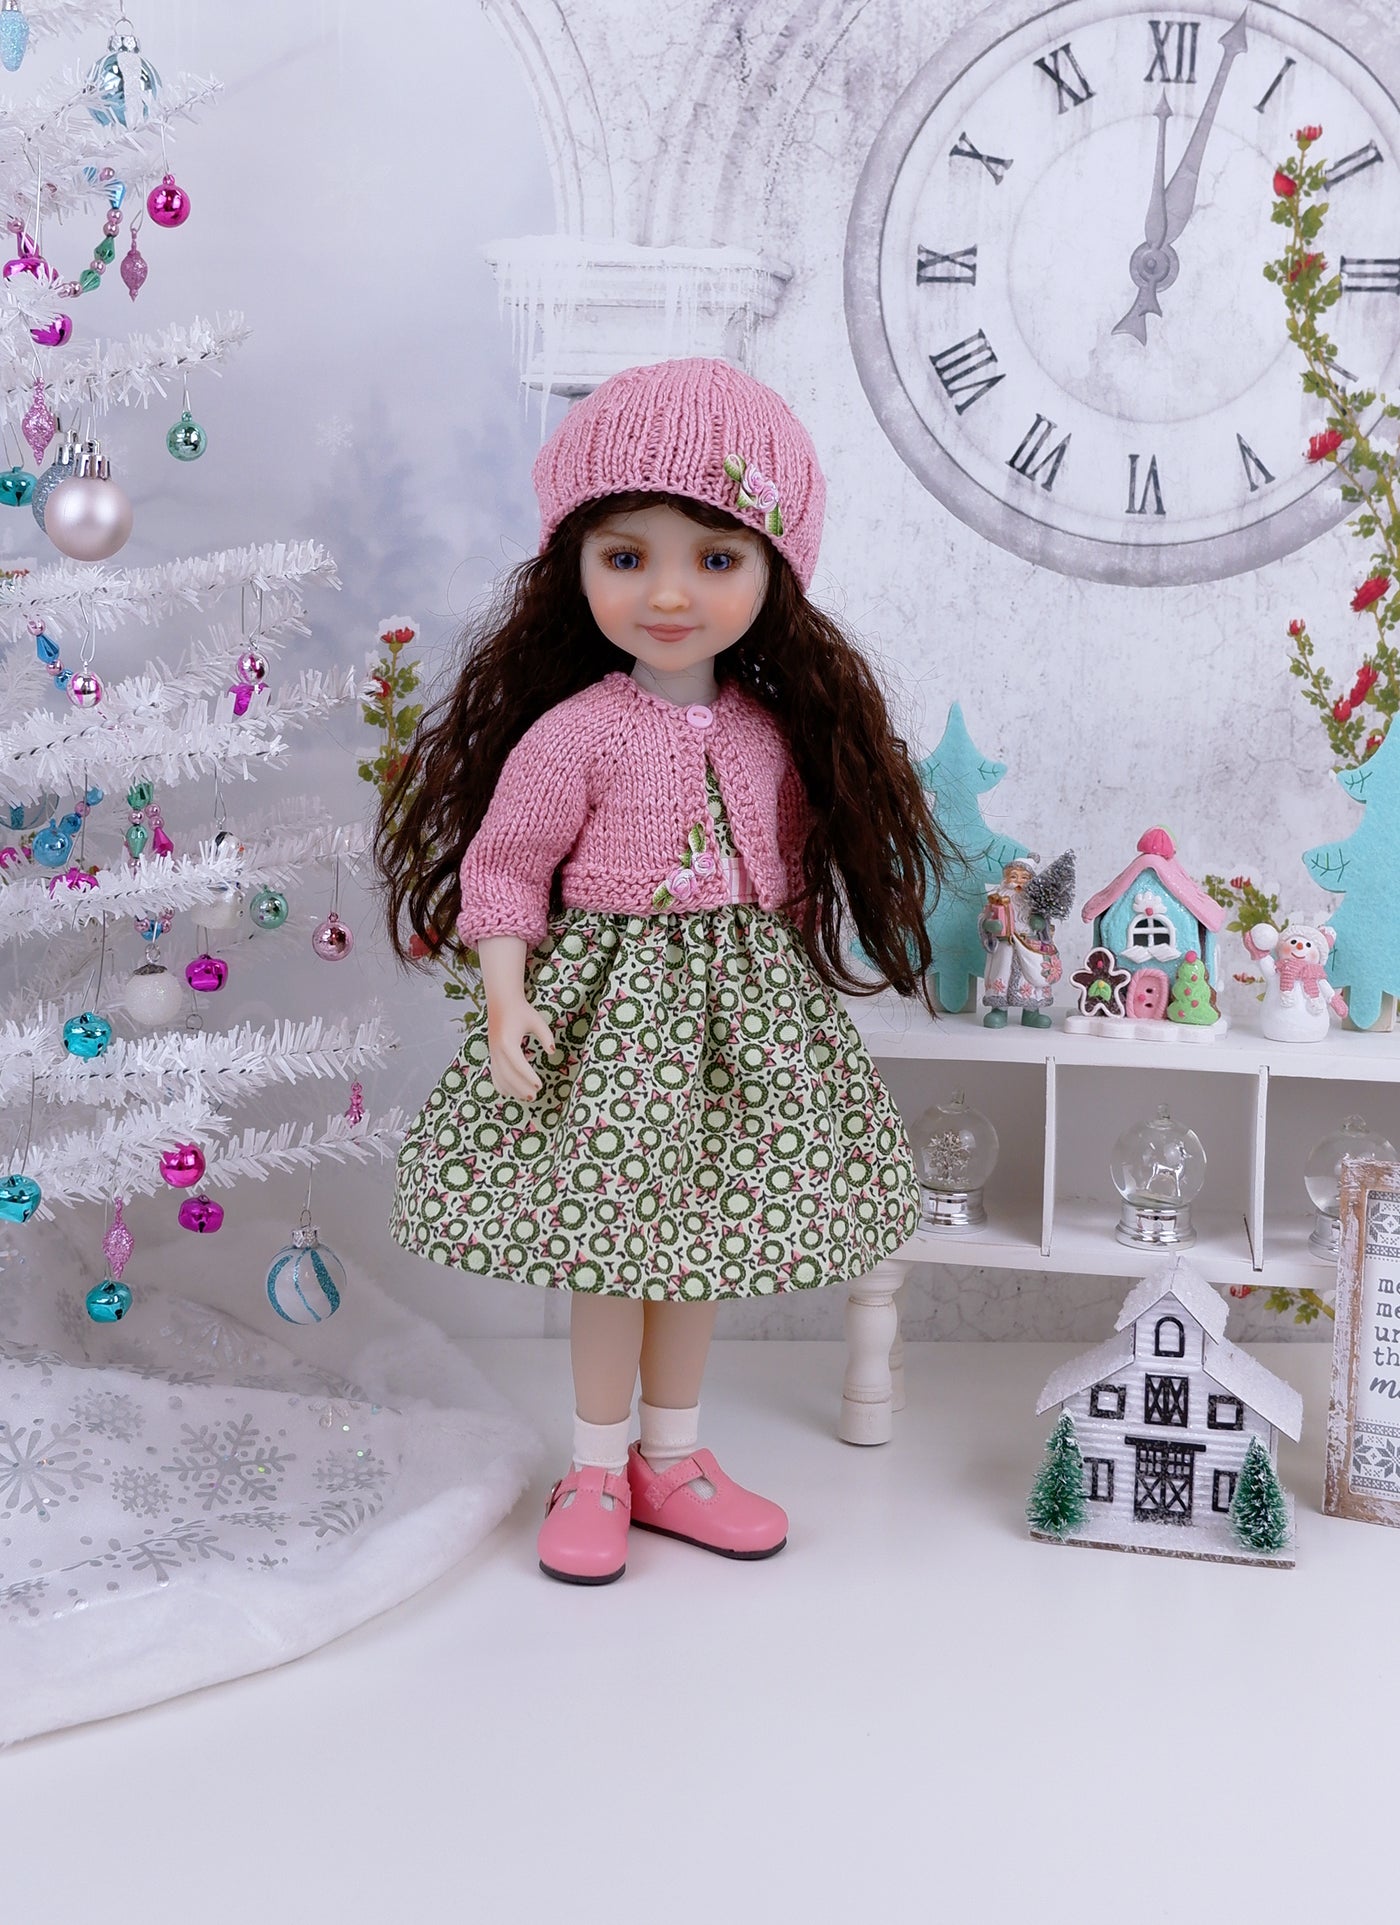 Merry Mini Wreaths - dress and sweater set with shoes for Ruby Red Fashion Friends doll